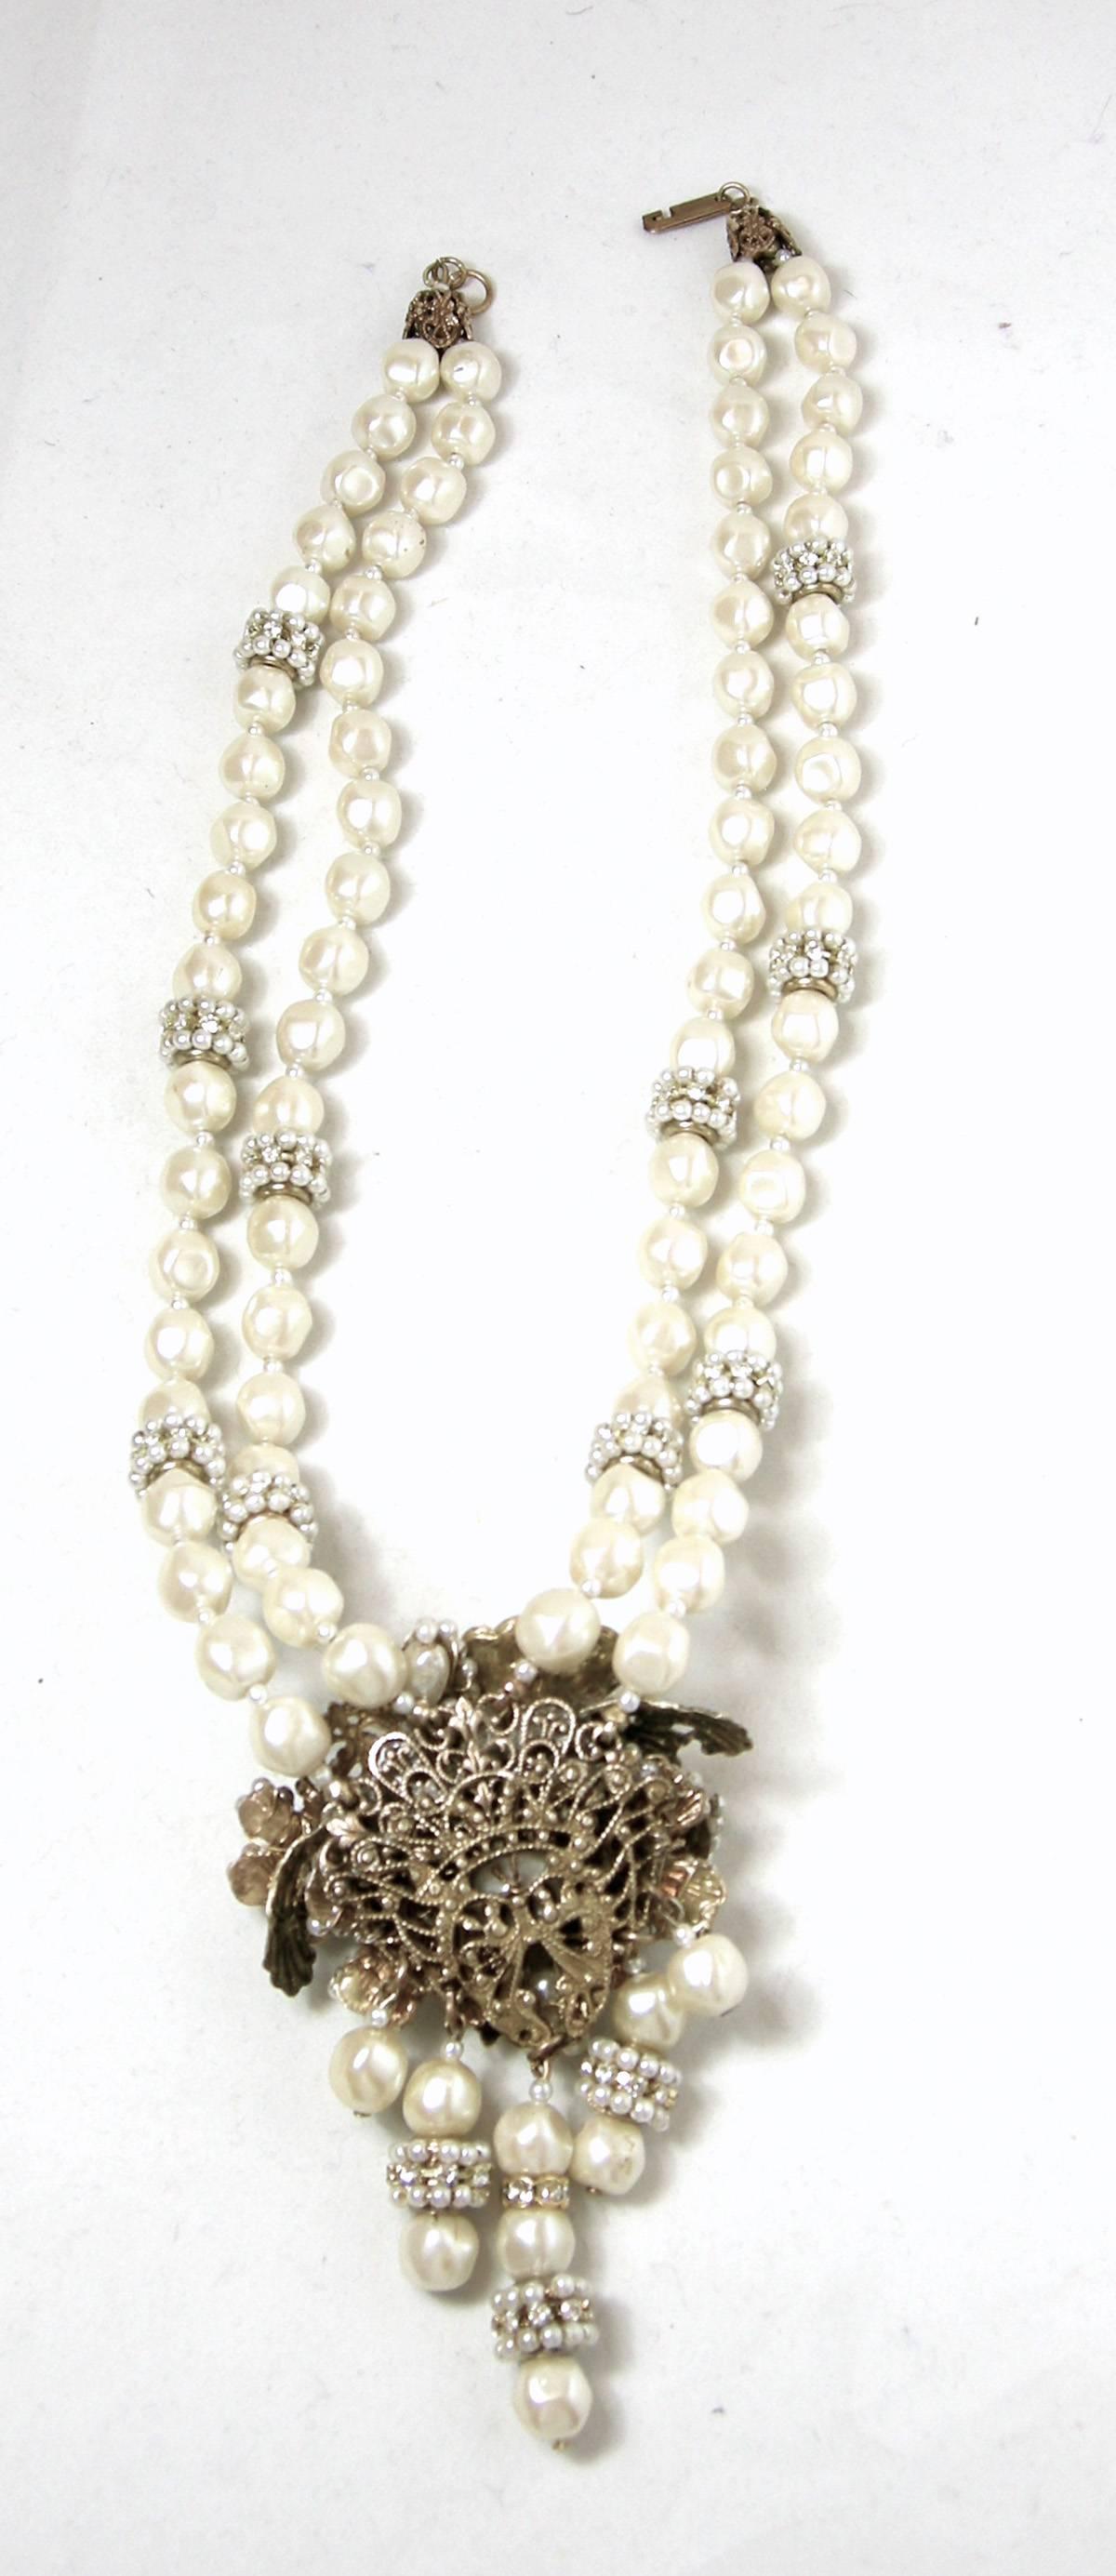 Women's or Men's Miriam Haskell Vintage Faux Pearl Double Strand Floral Drop Necklace